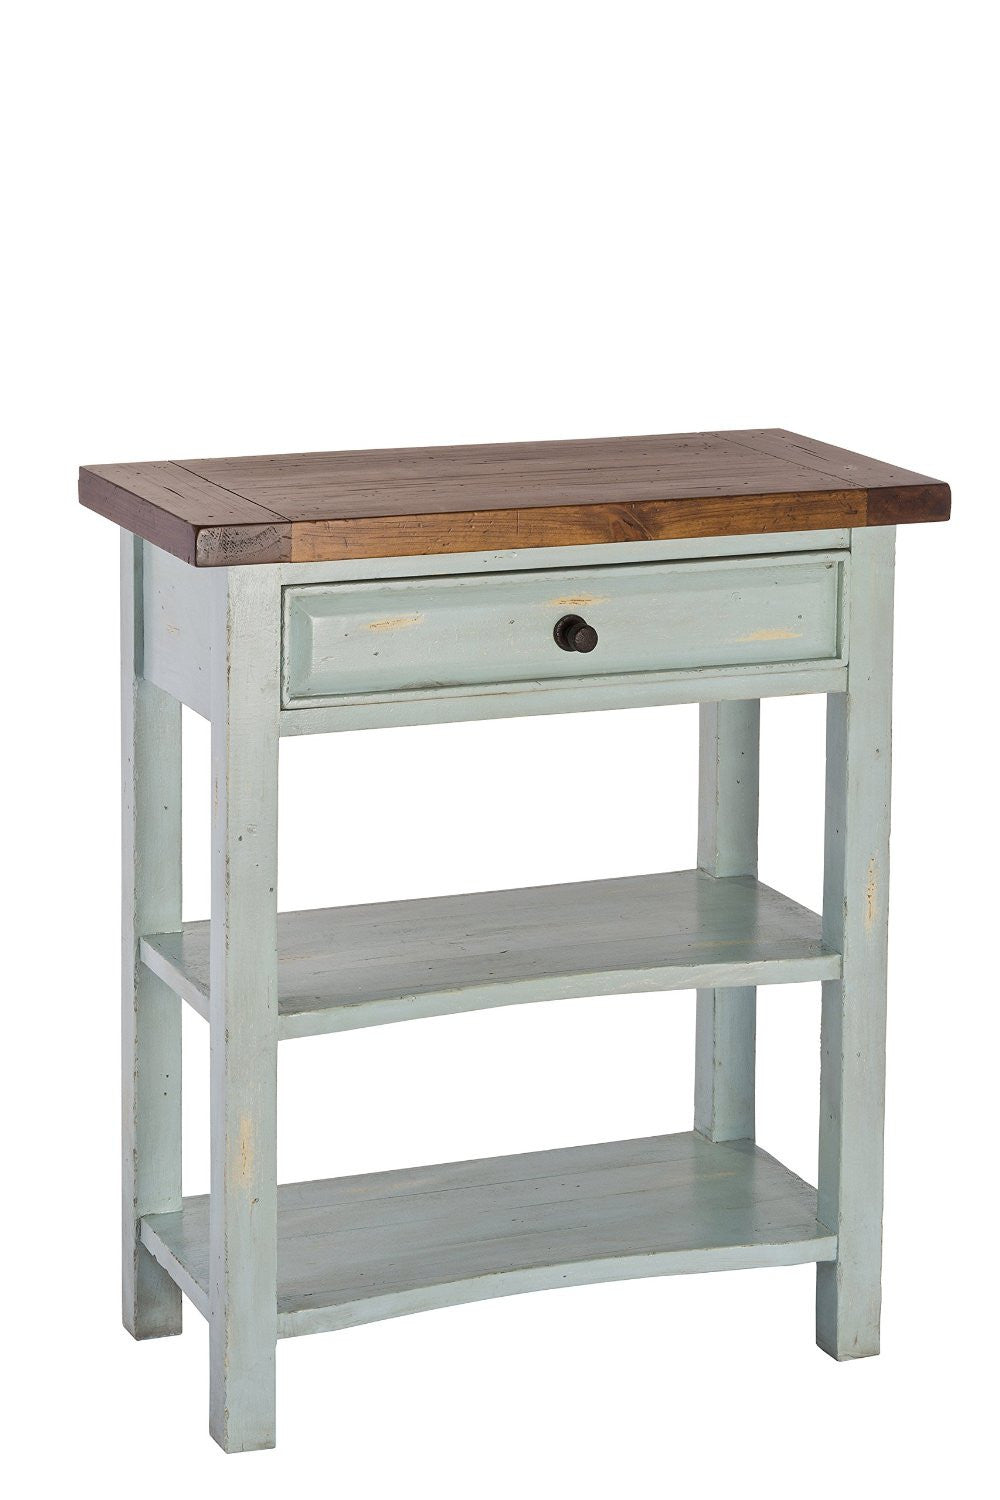 Hillsdale Furniture 5362-889w Tuscan Retreat® Single Drawer Console Table